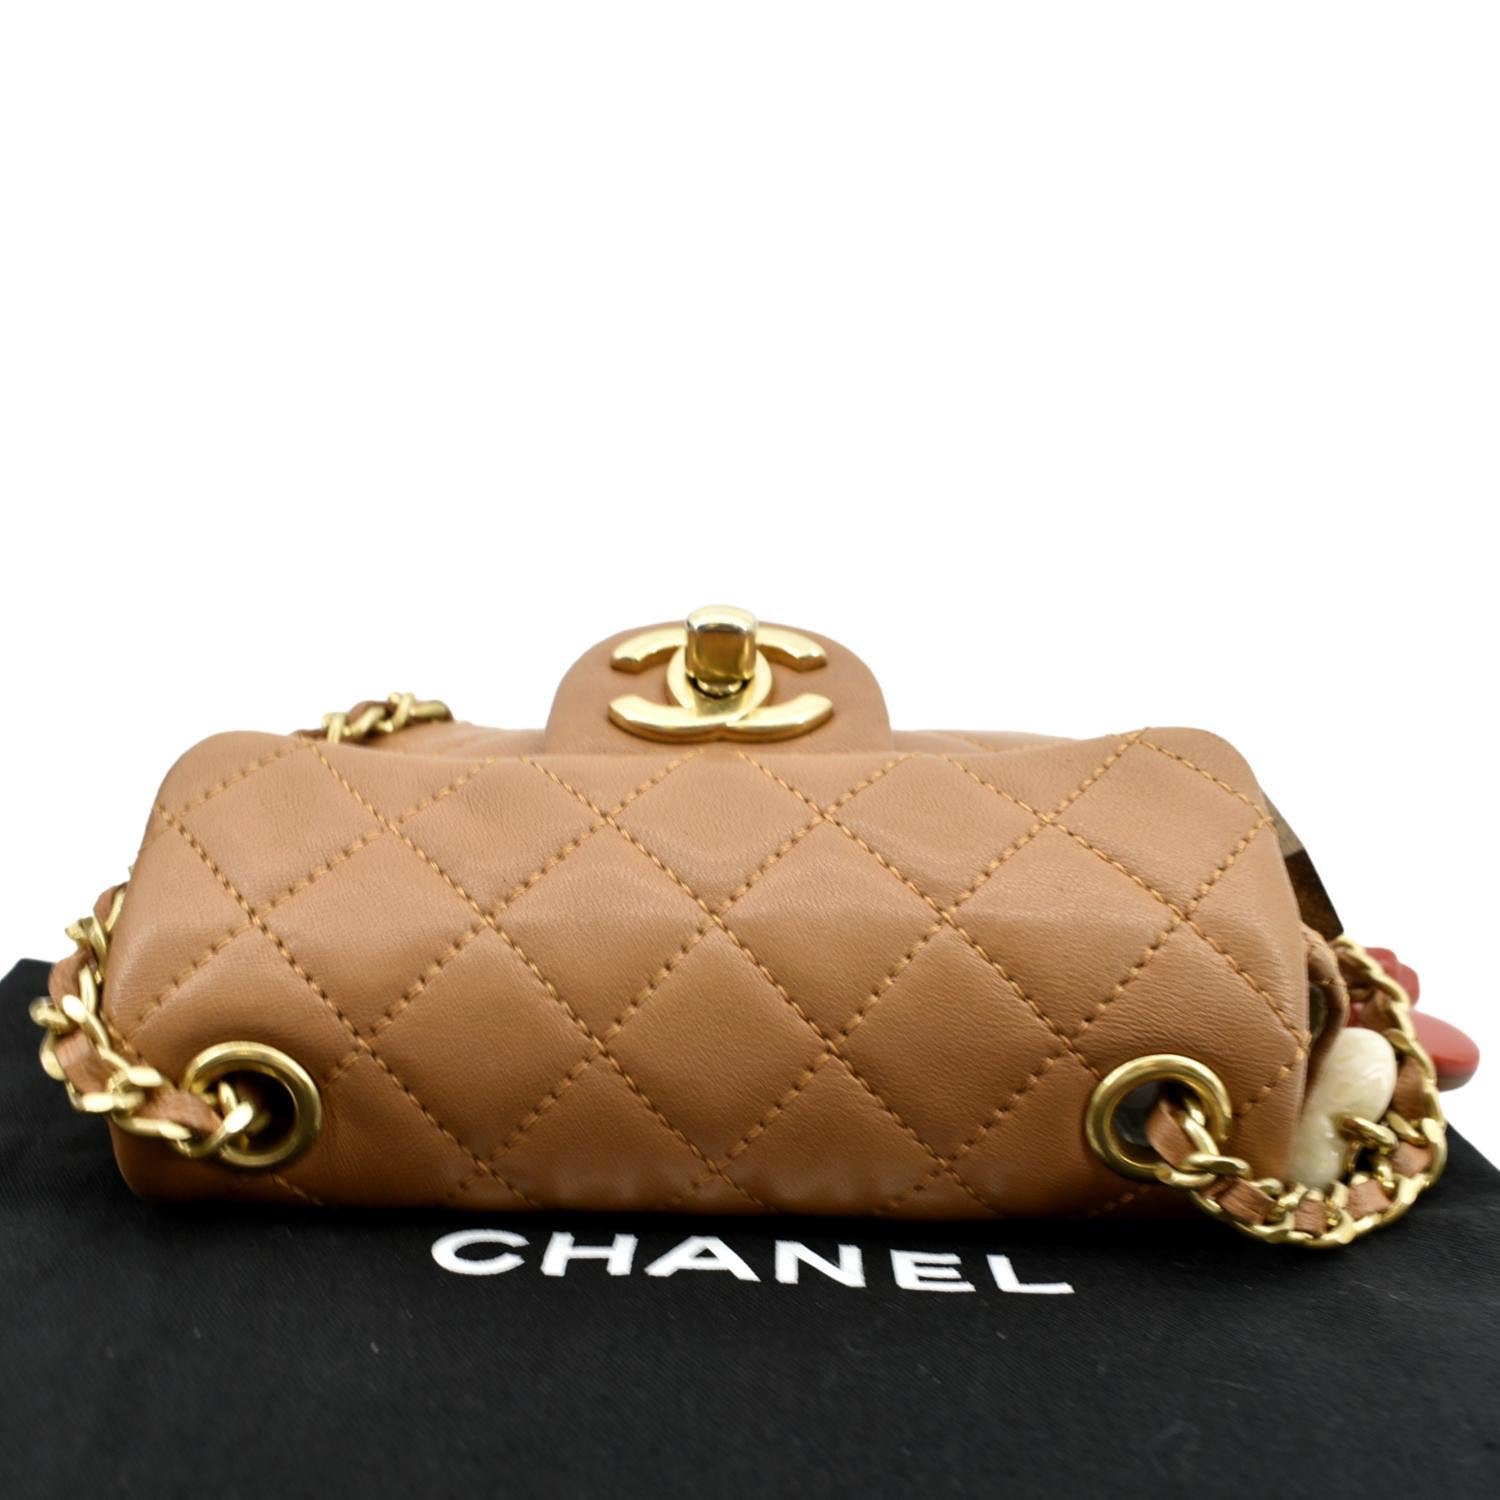 Chanel Marine Charms Mini Quilted Leather Crossbody Bag Dark Beige